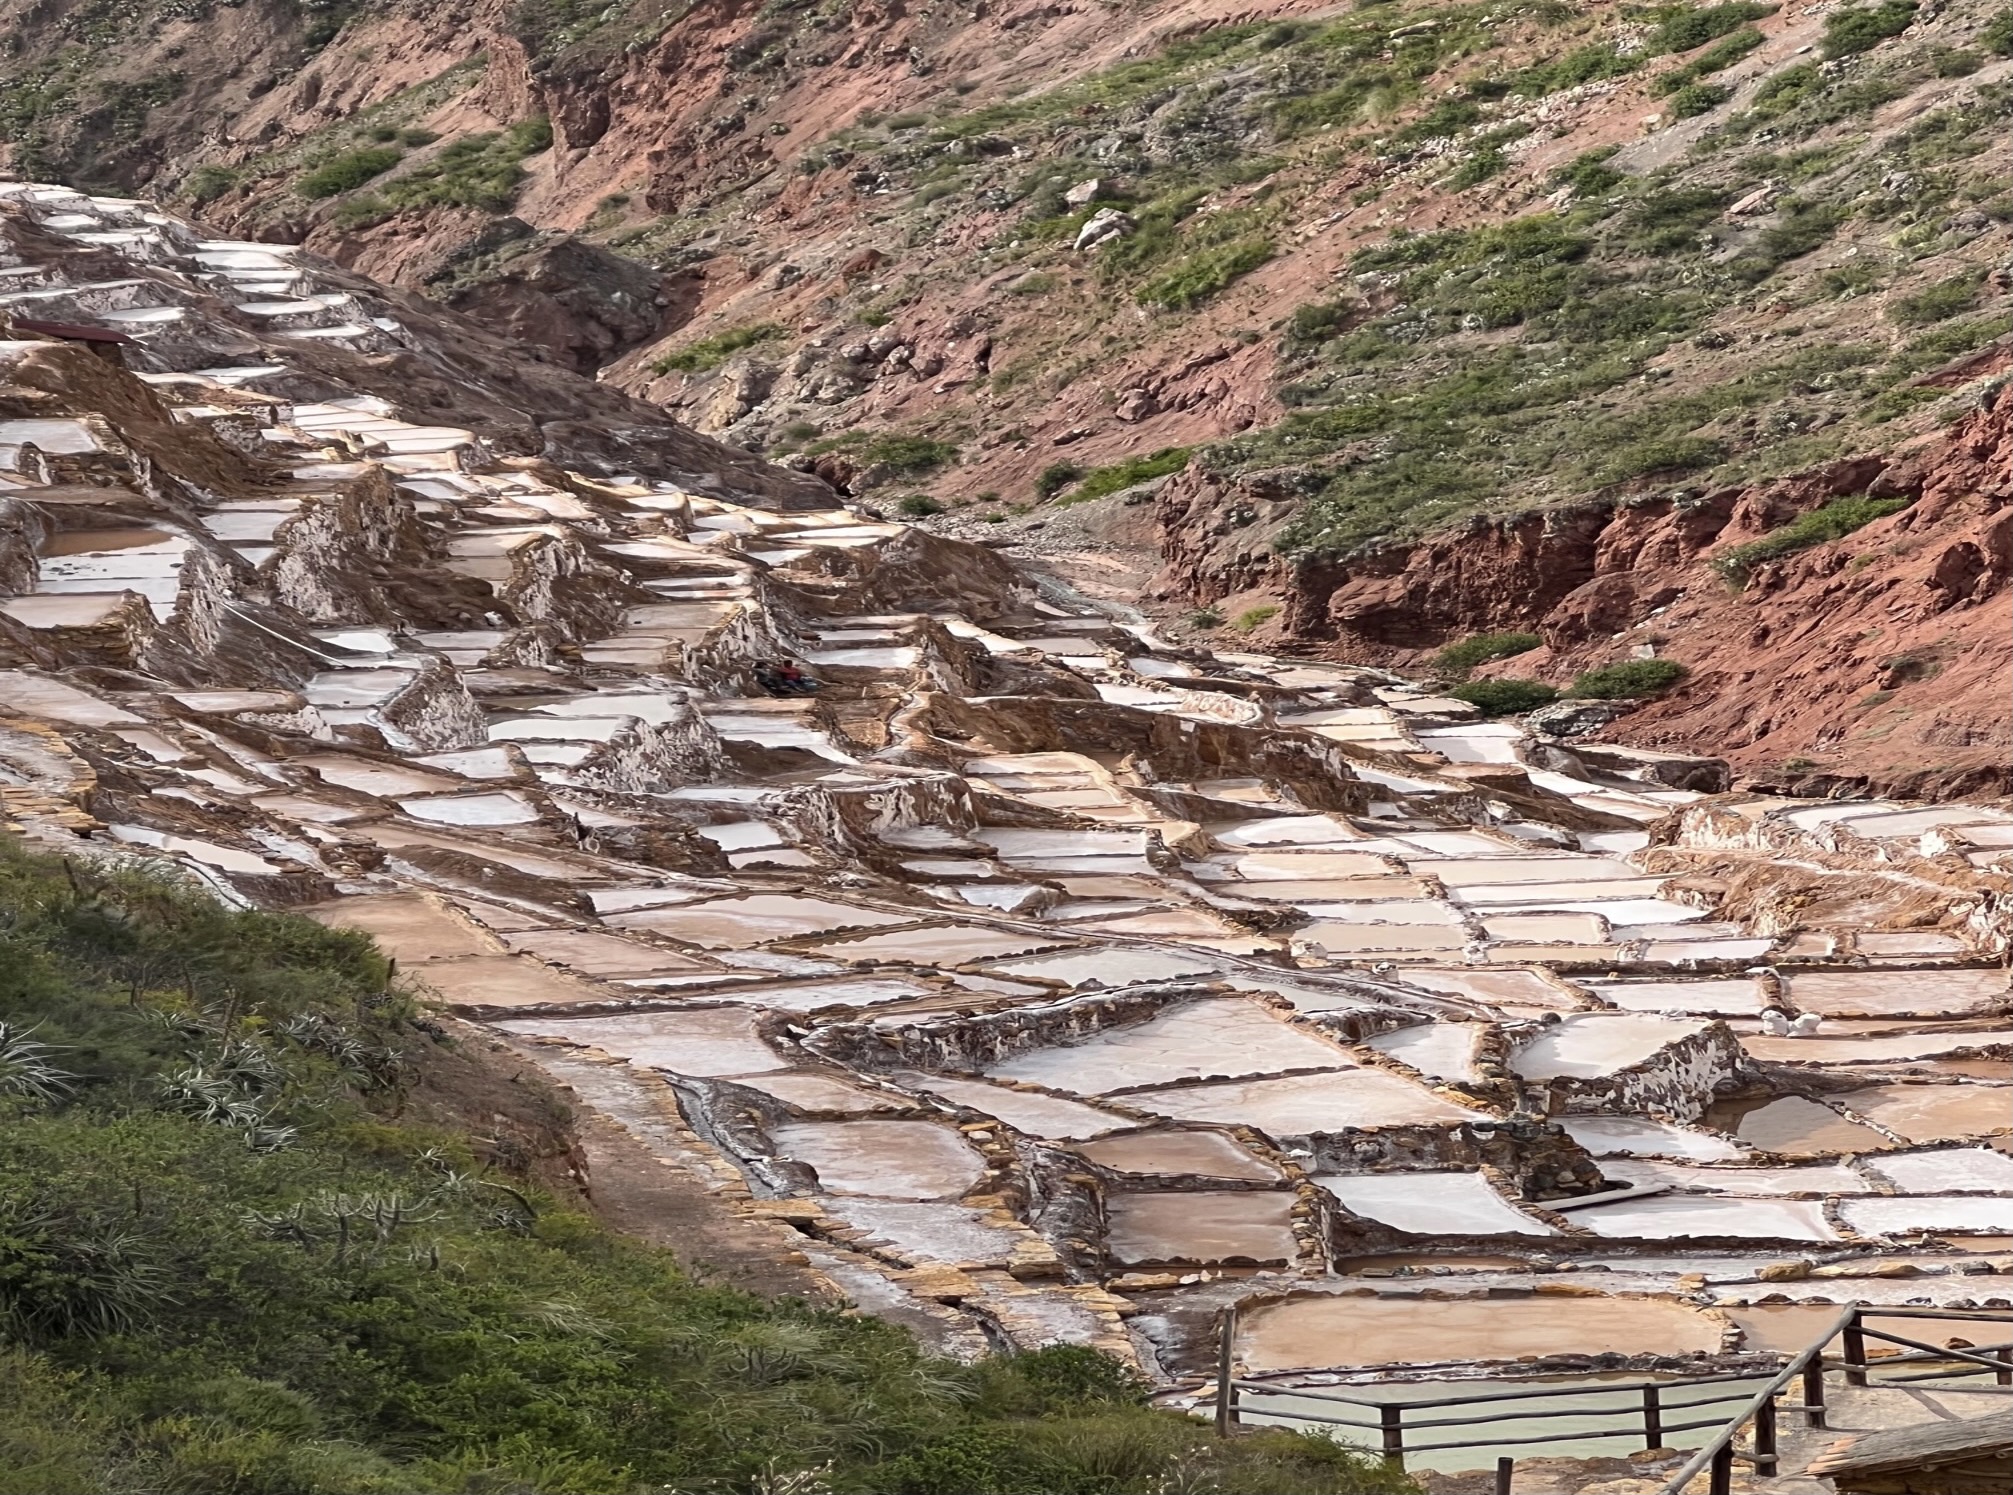 View of the Salinas de Maras at the Sacred Valley of the Incas.